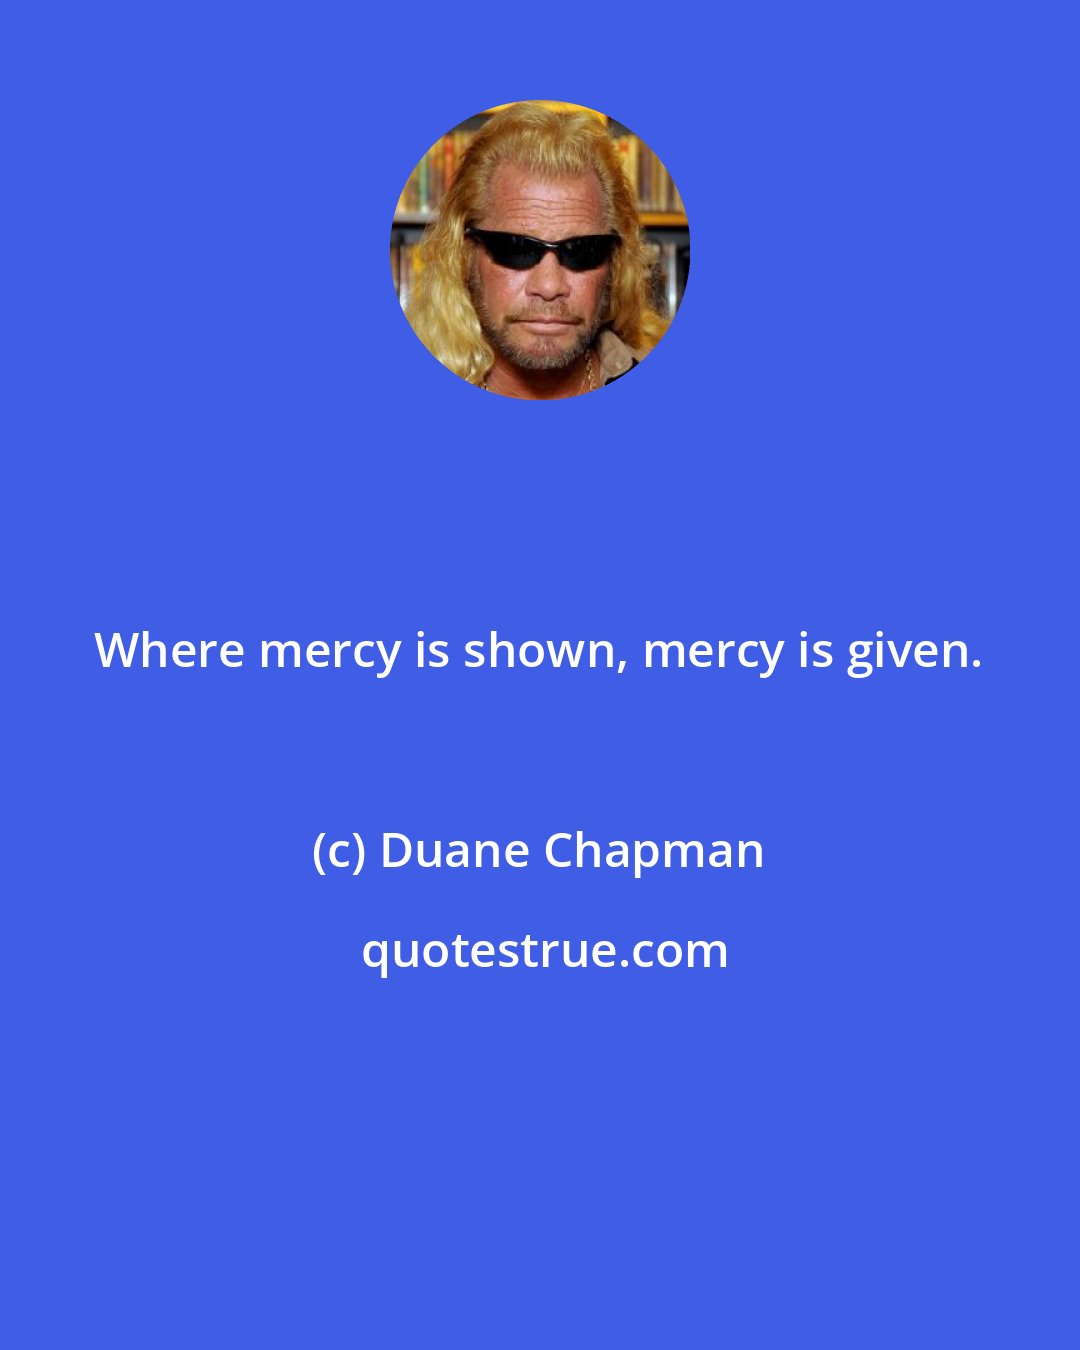 Duane Chapman: Where mercy is shown, mercy is given.